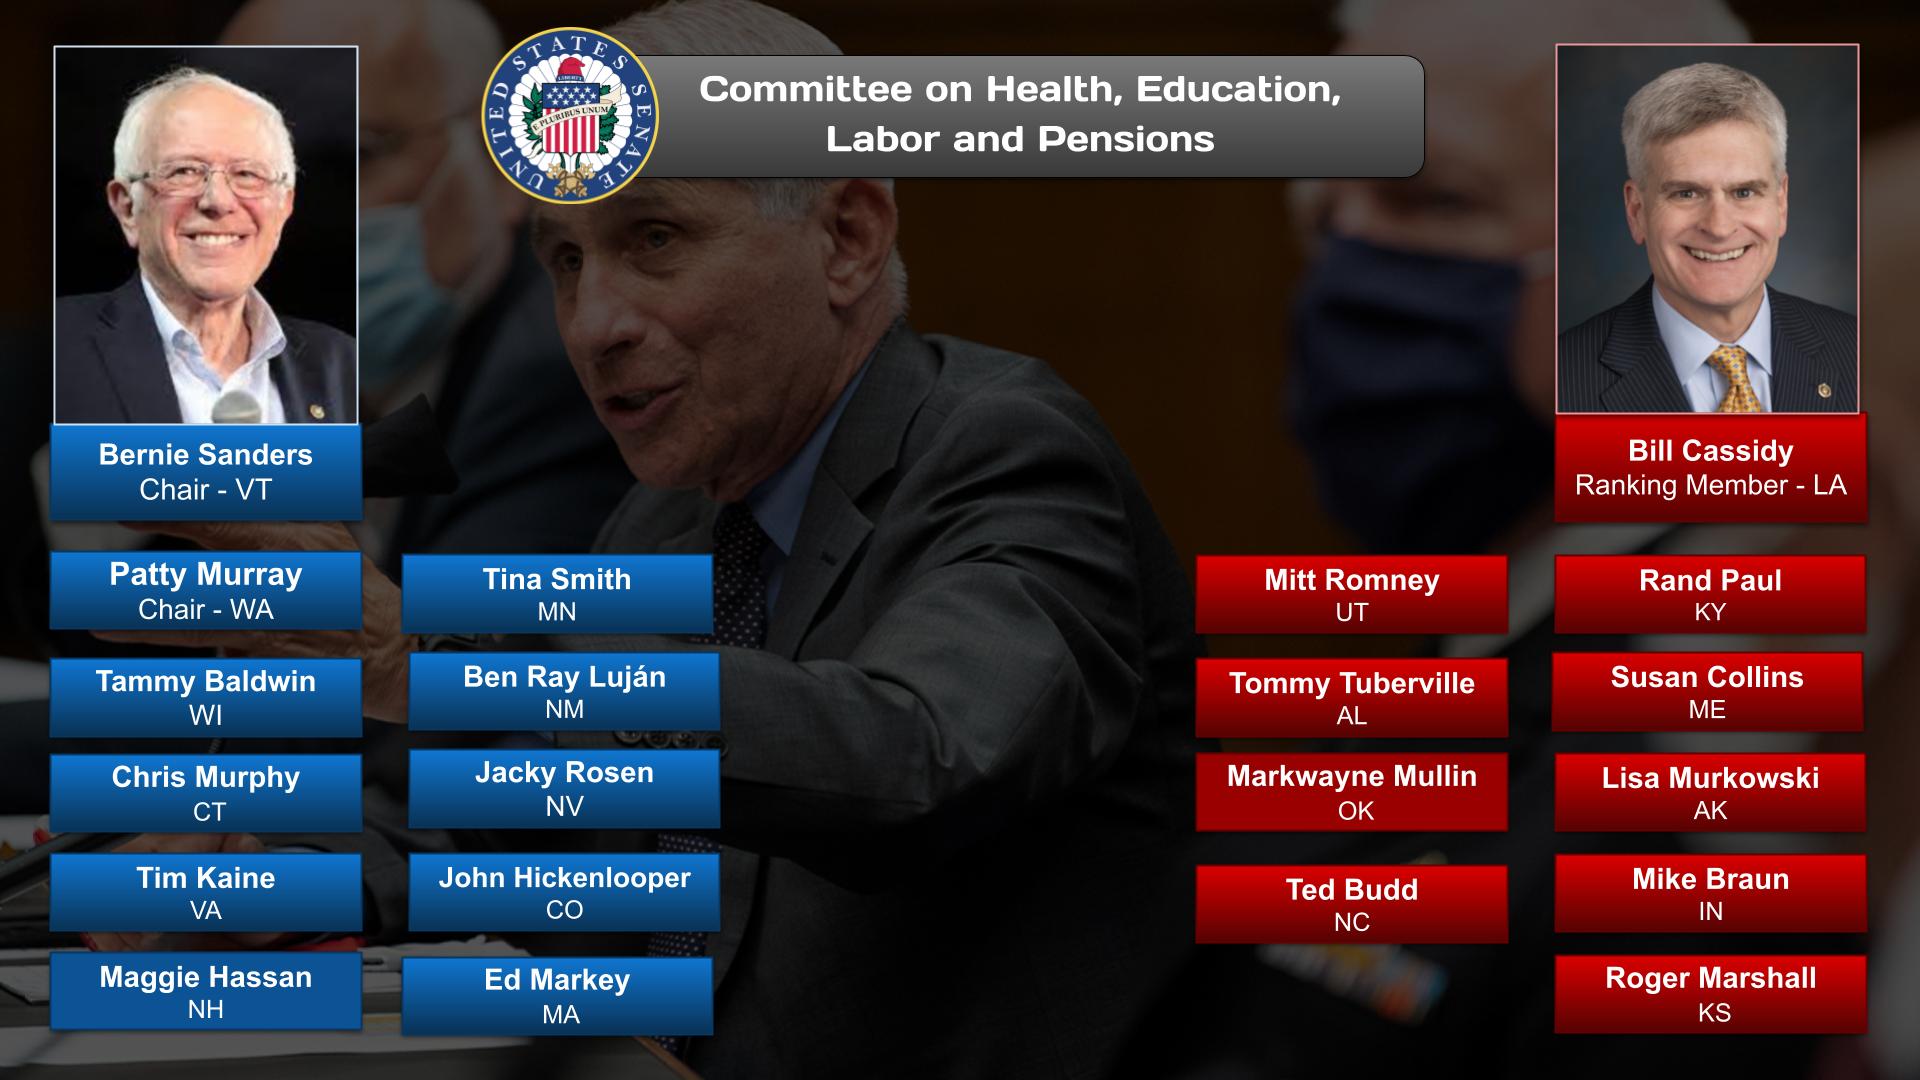 Committee on Health, Education, Labor, and Pensions